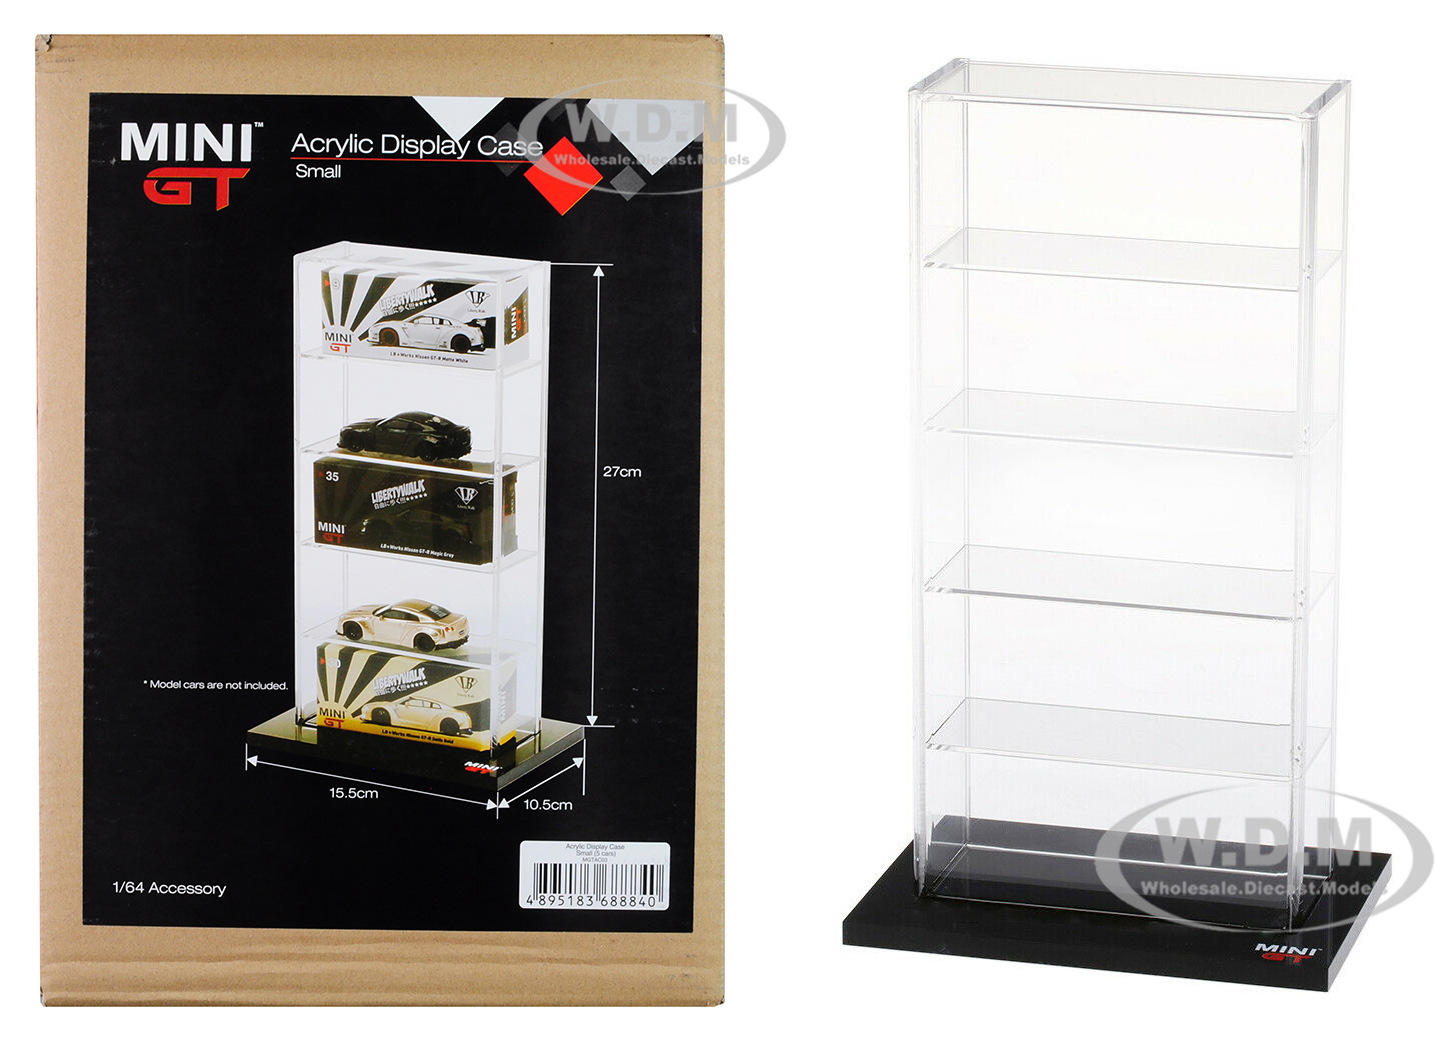 5 Car Acrylic Display Show Case Small "mini Gt" For 1/64 Scale Model Cars By True Scale Miniatures